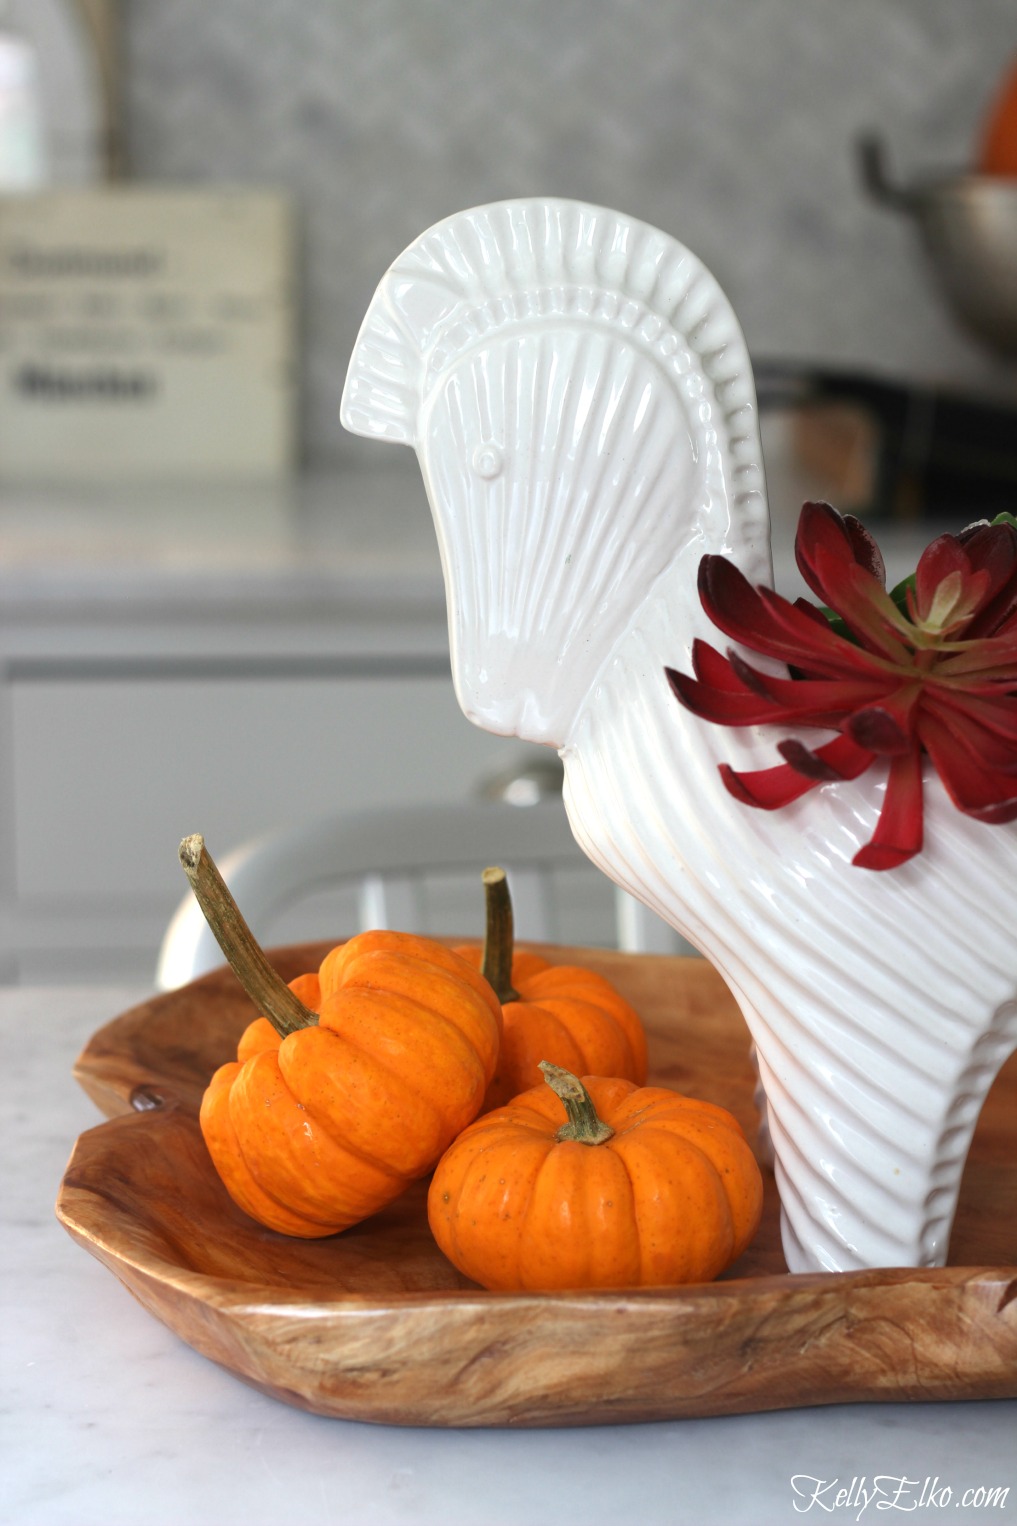 Love this fall centerpiece with faux succulents and mini pumpkins in a cool horse container kellyelko.com